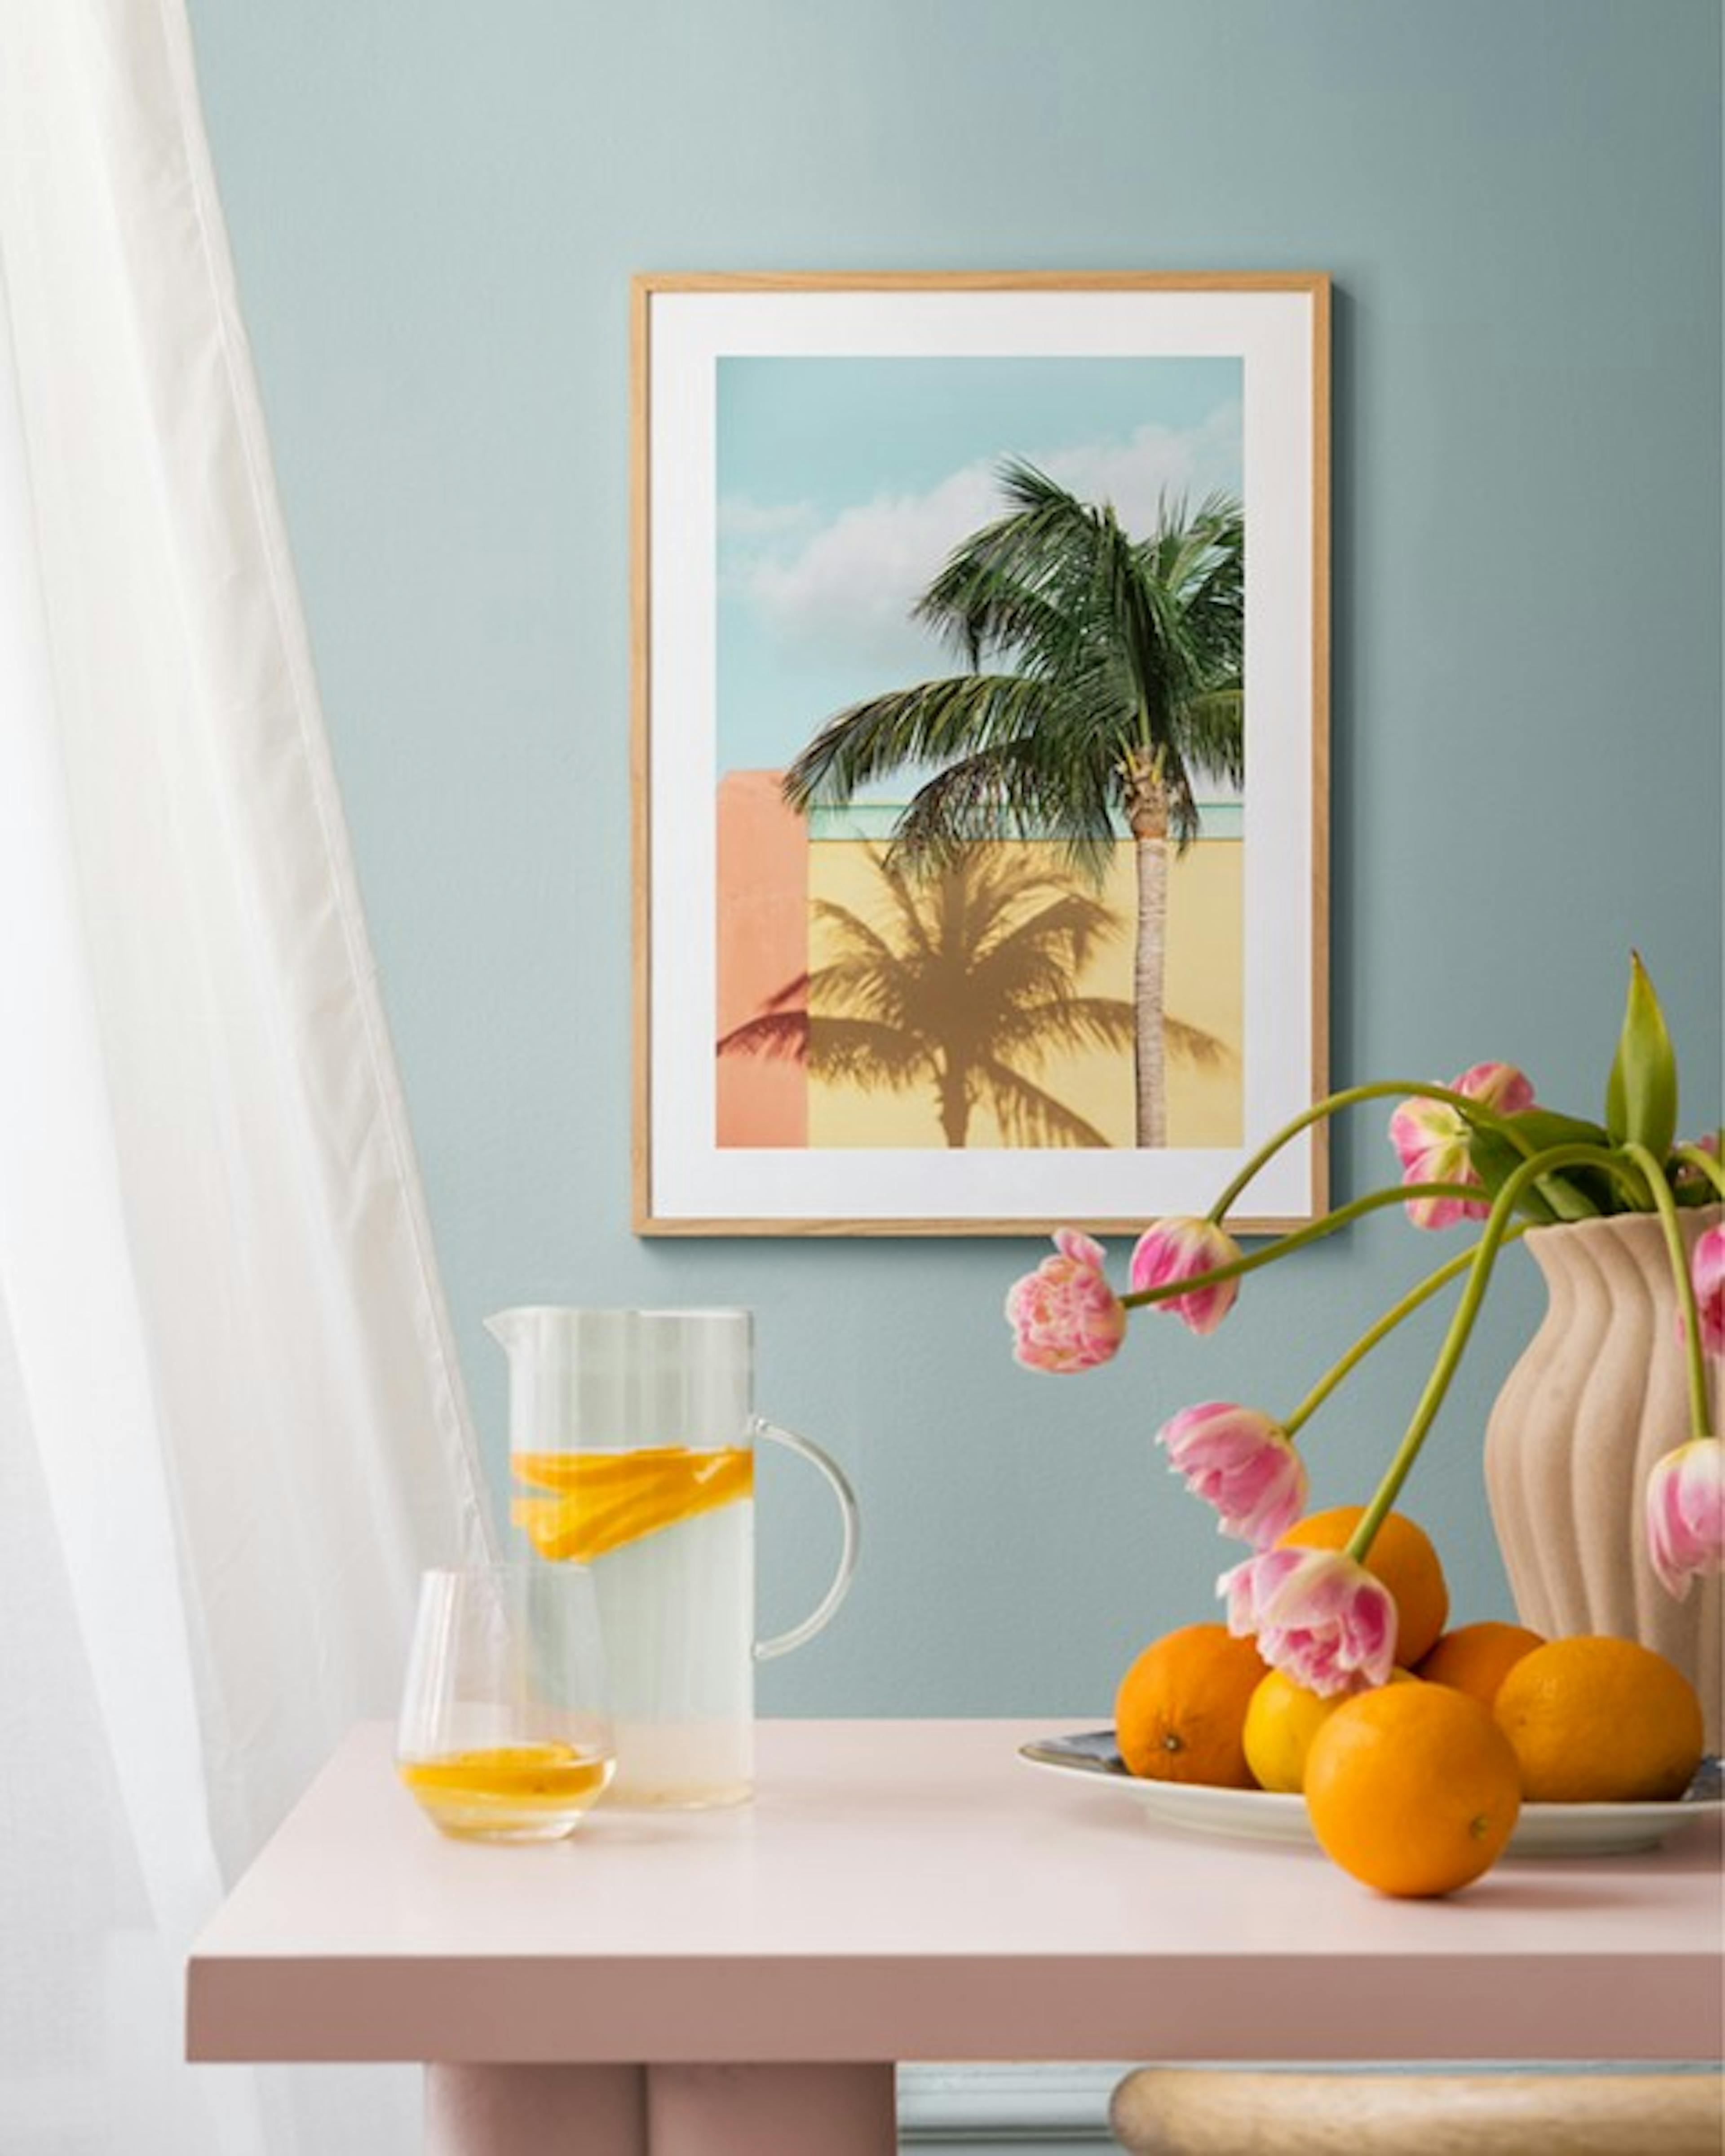 Sun-drenched Palm Poster